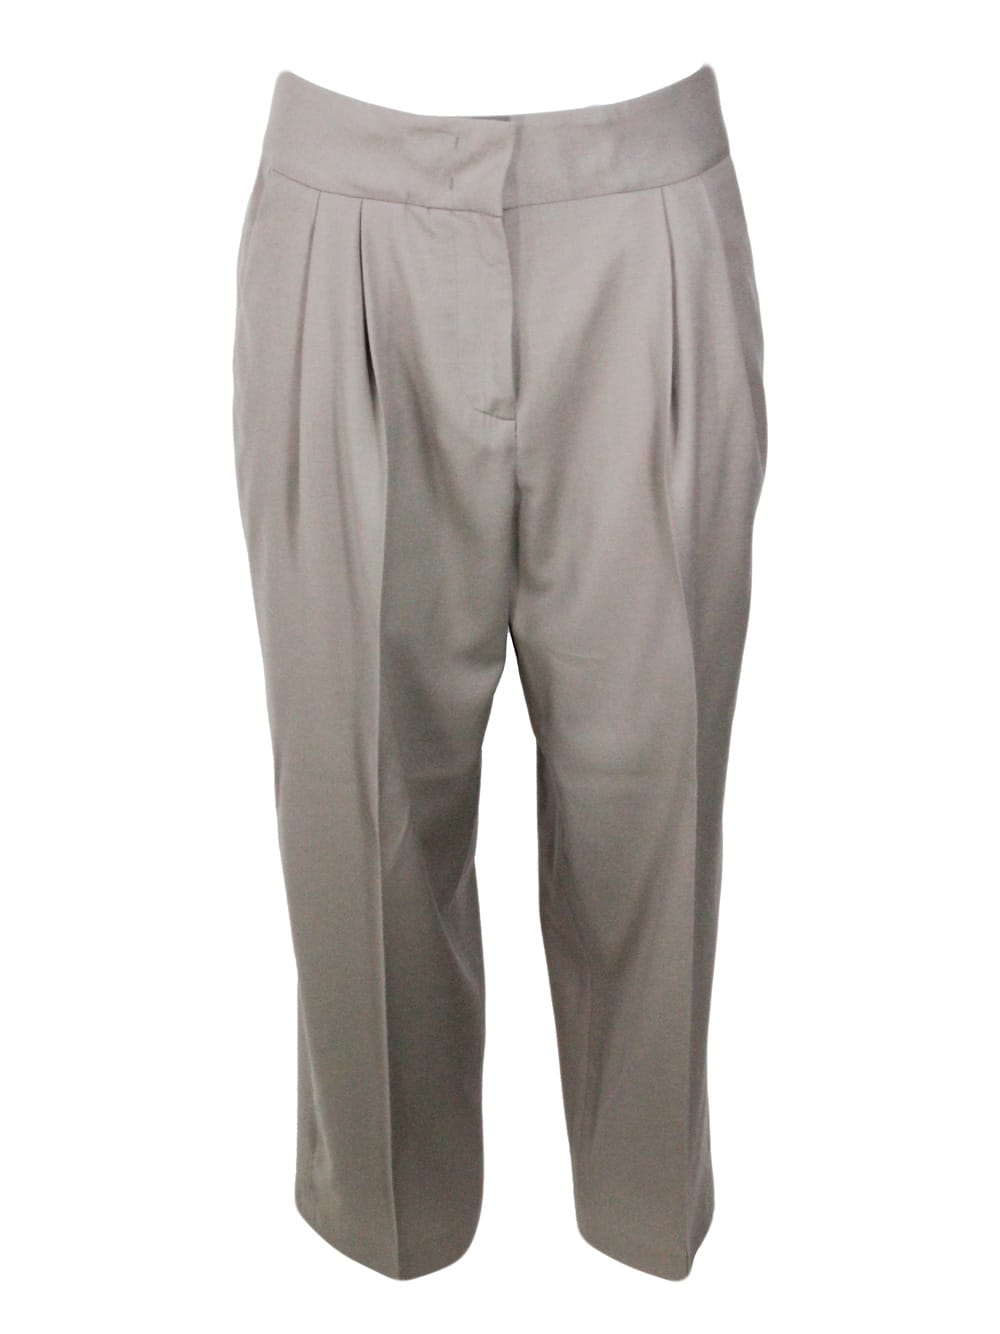 FABIANA FILIPPI WIDE TROUSERS WITH PENCES AND WELT POCKETS IN SOFT STRETCH WOOL